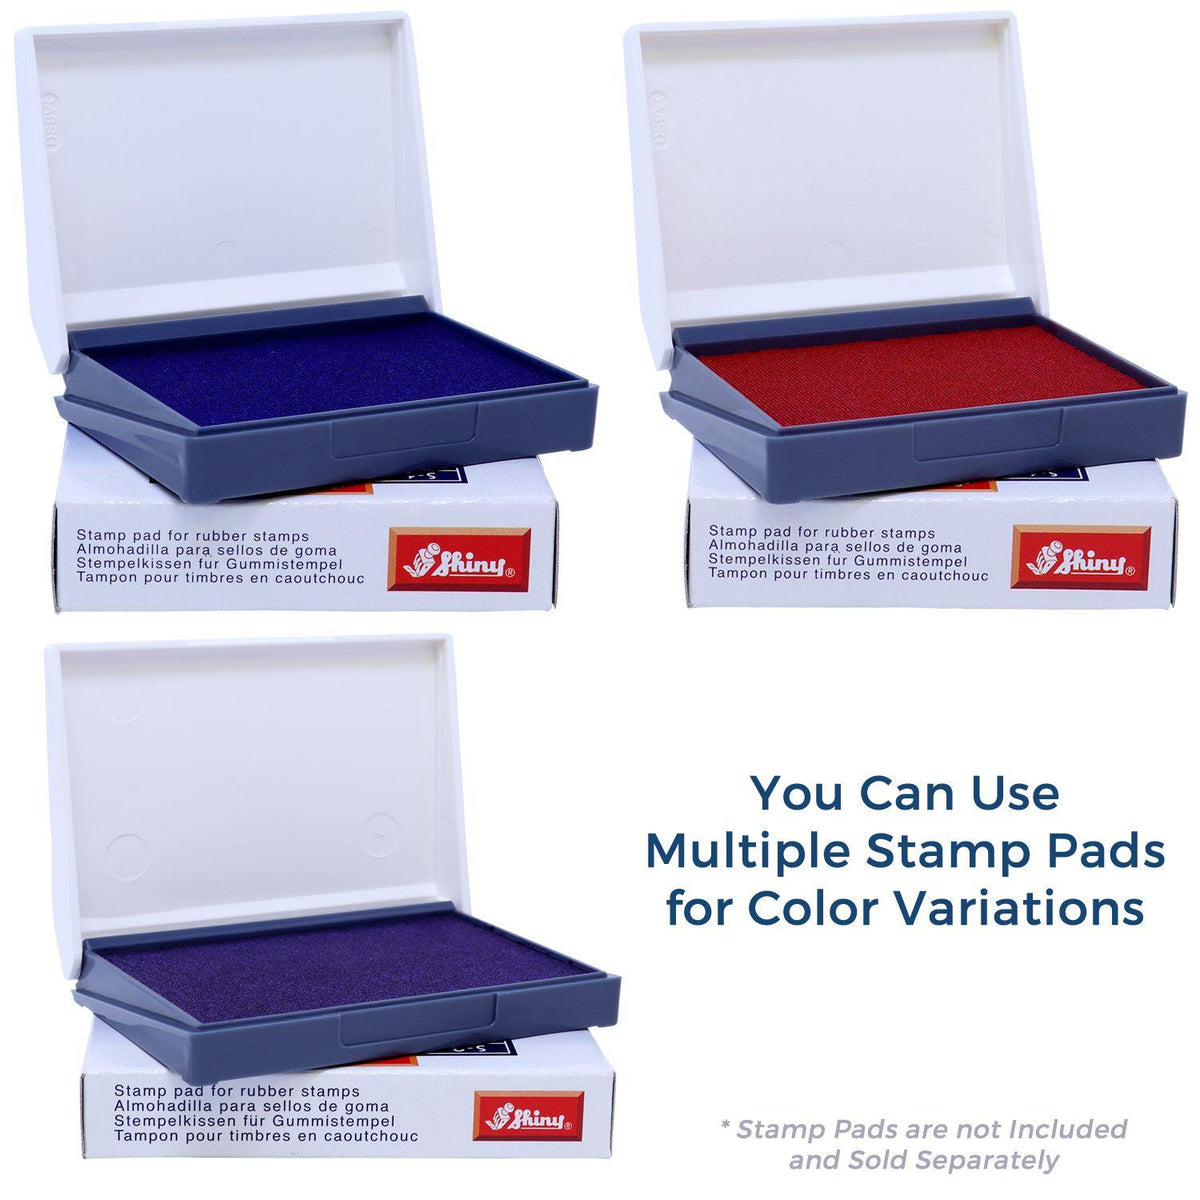 Stamp Pads for Large Rh Negative Rubber Stamp Available